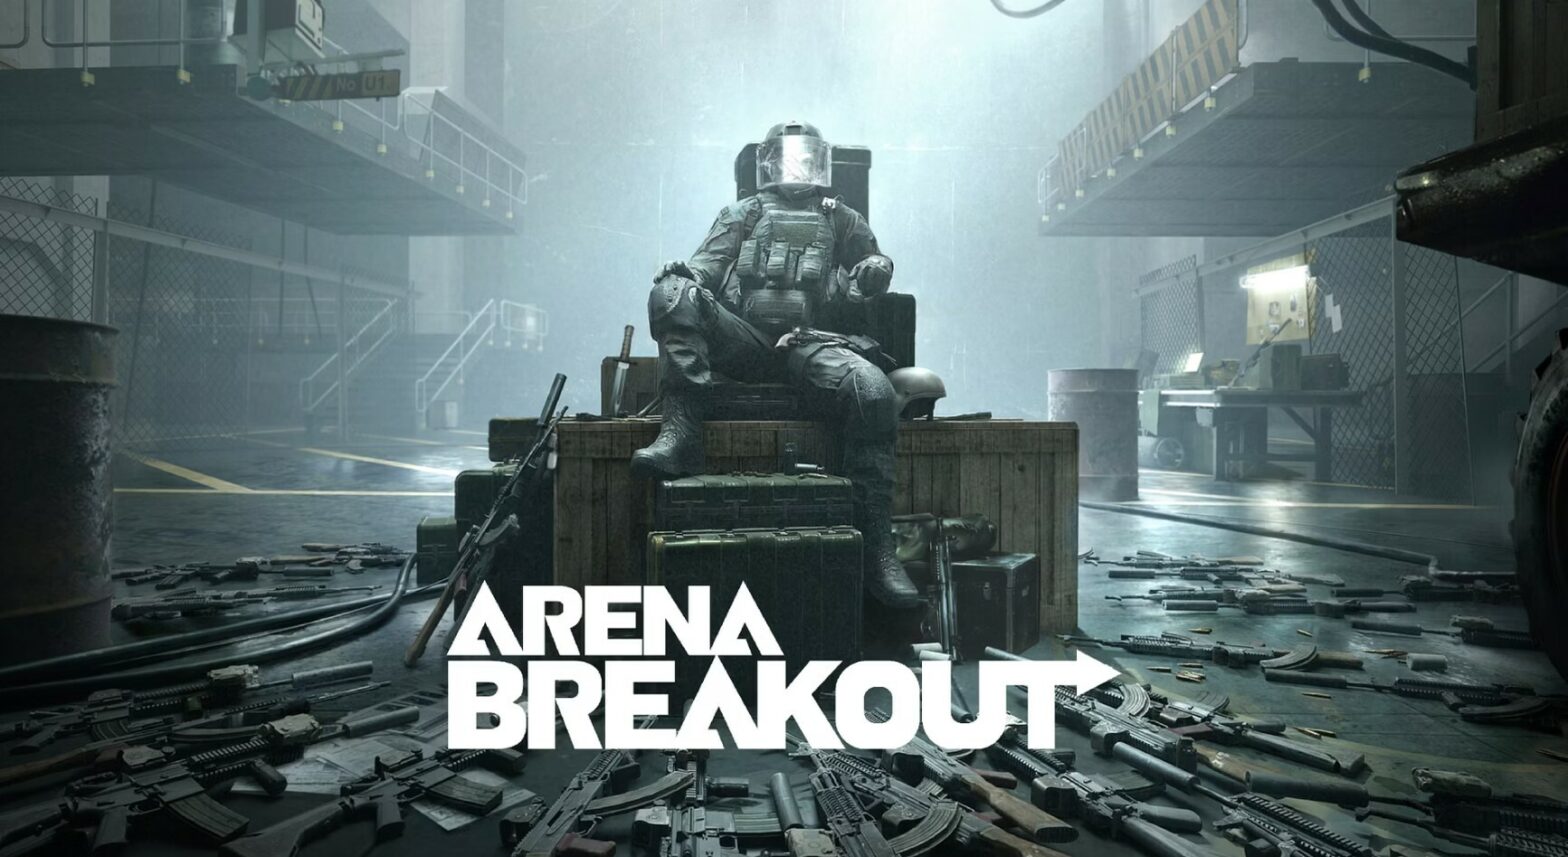 Tencent’s Arena Breakout has attracted over 80 million players in a month